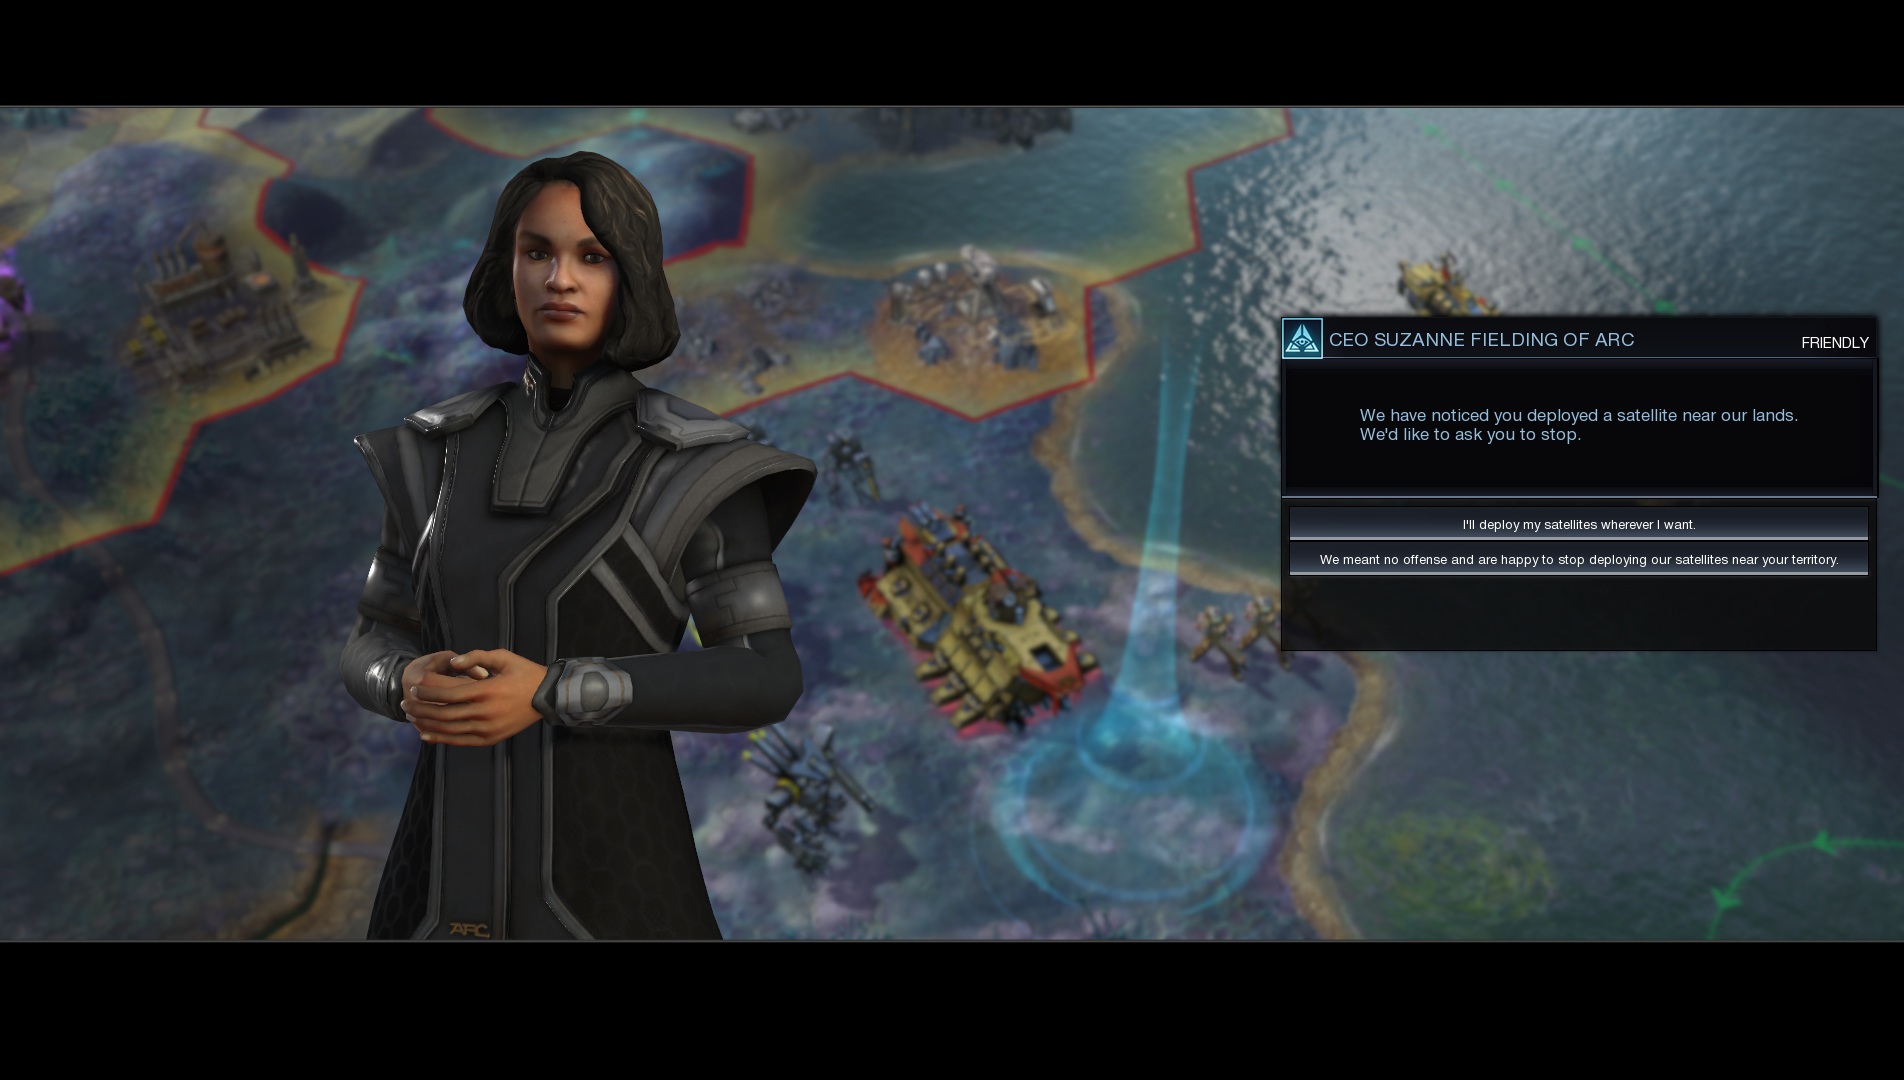 download free civilization beyond earth 2